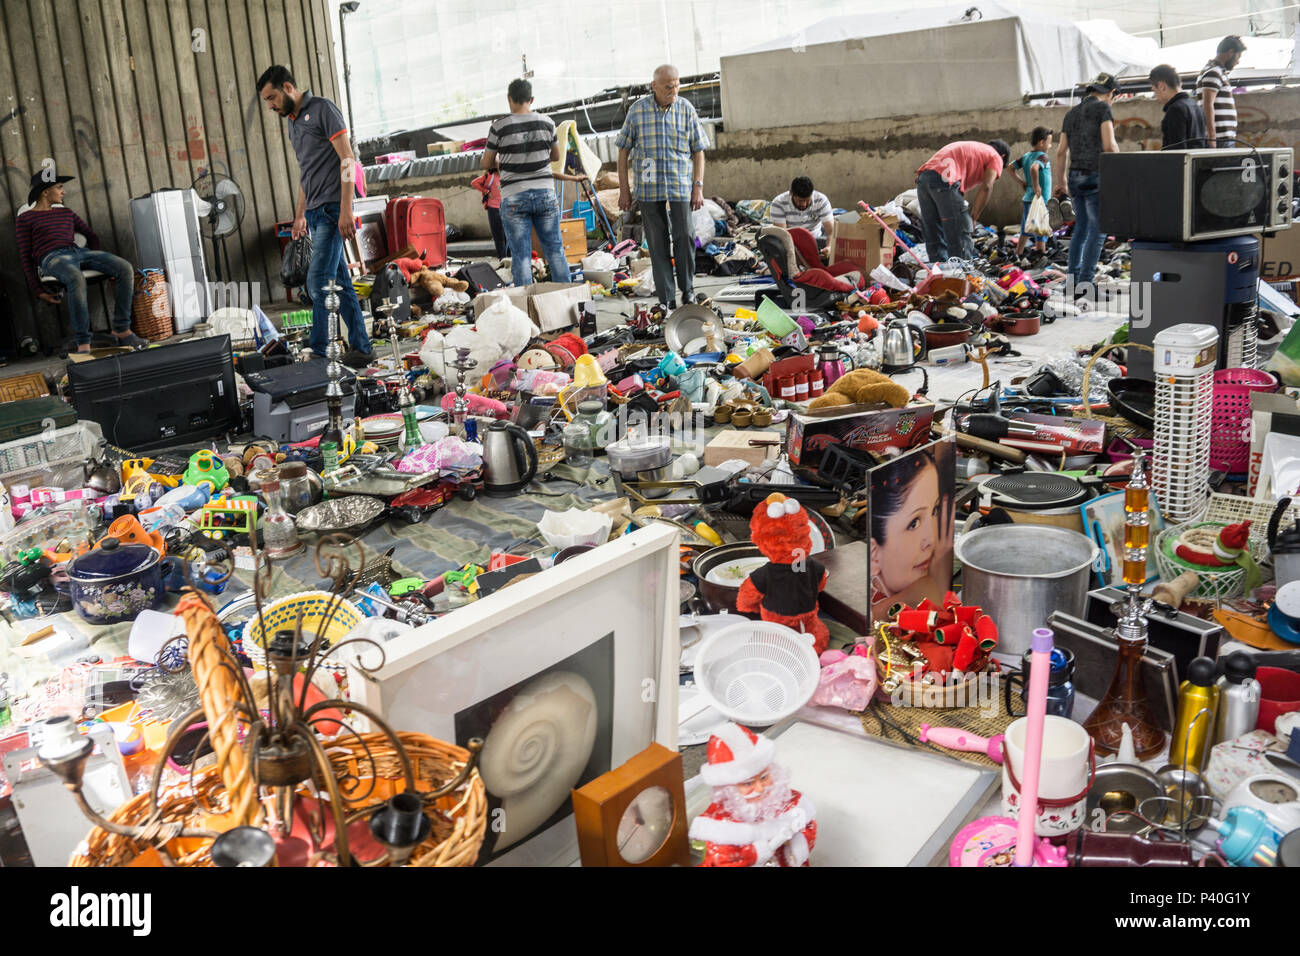 Used items stall in a flea market Stock Photo